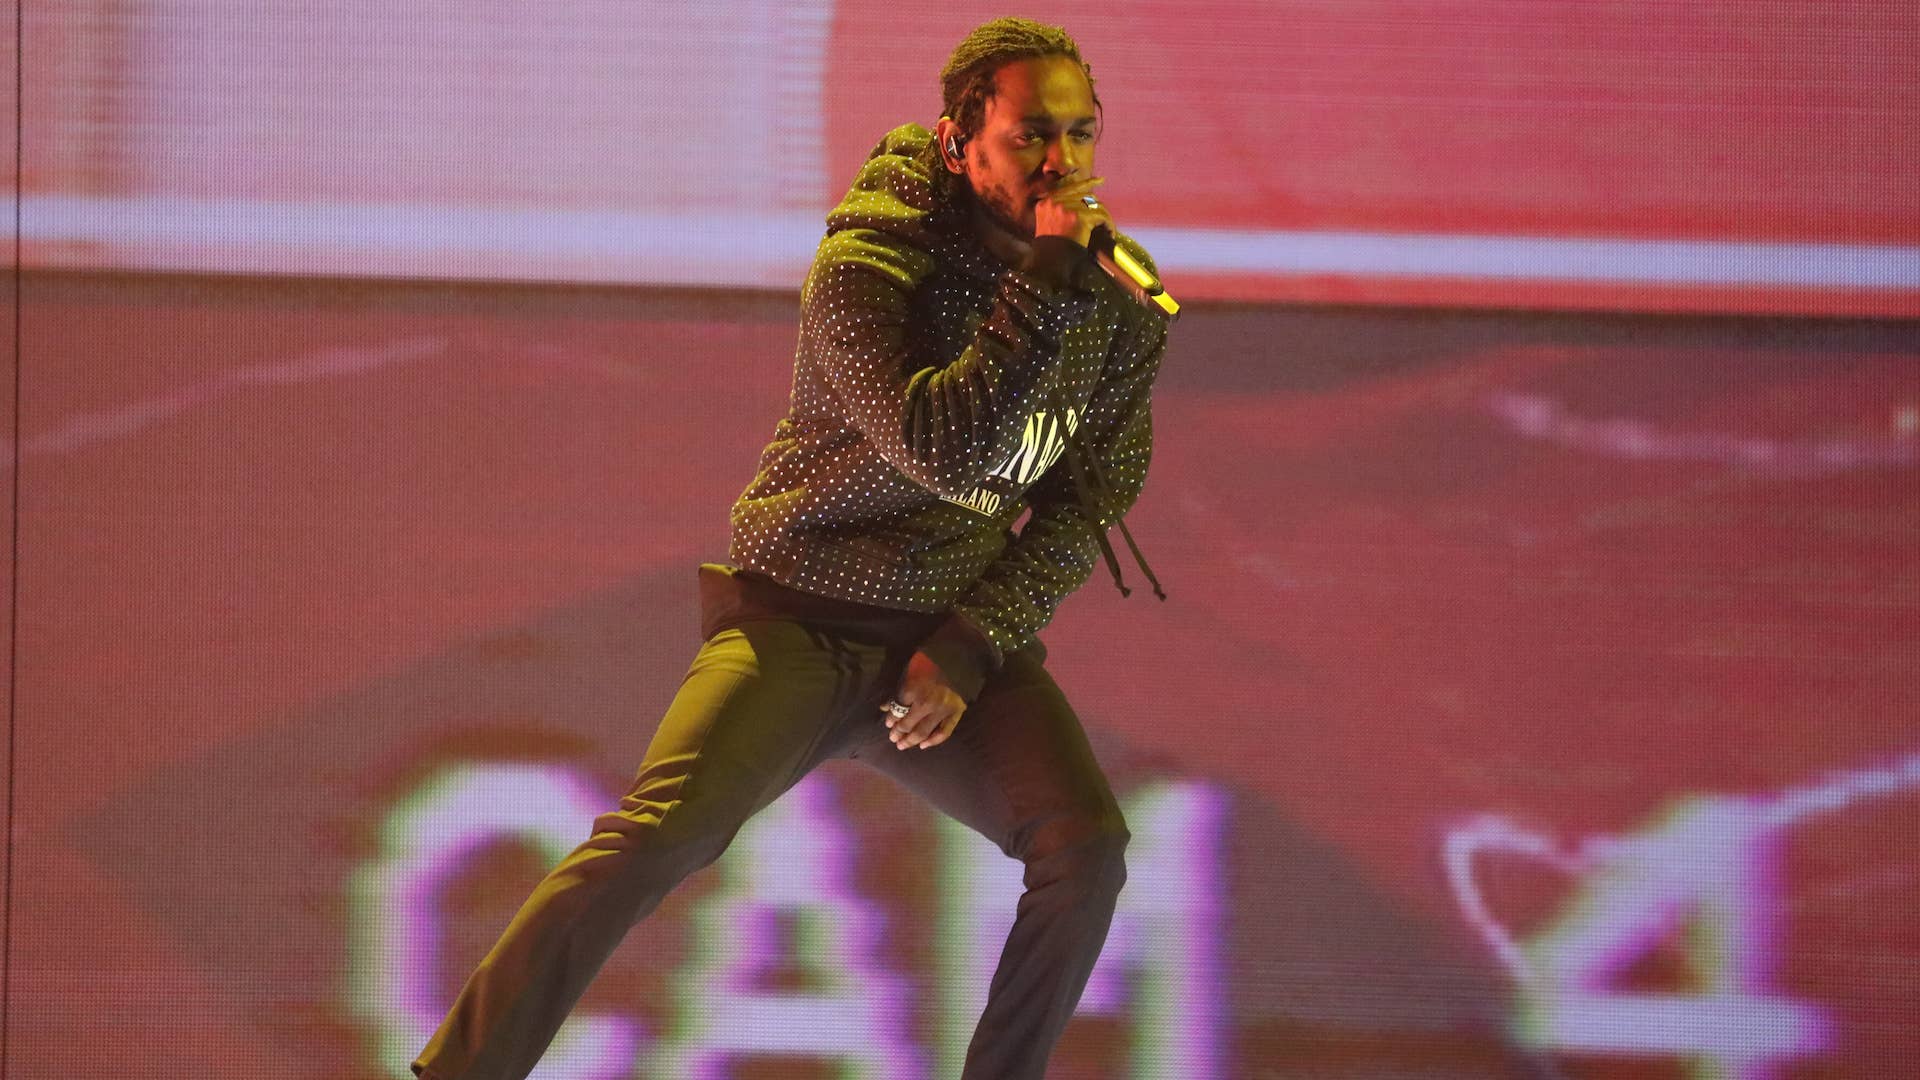 Kendrick Lamar performs 'Feel' and 'New Freezer' on stage at The BRIT Awards 2018